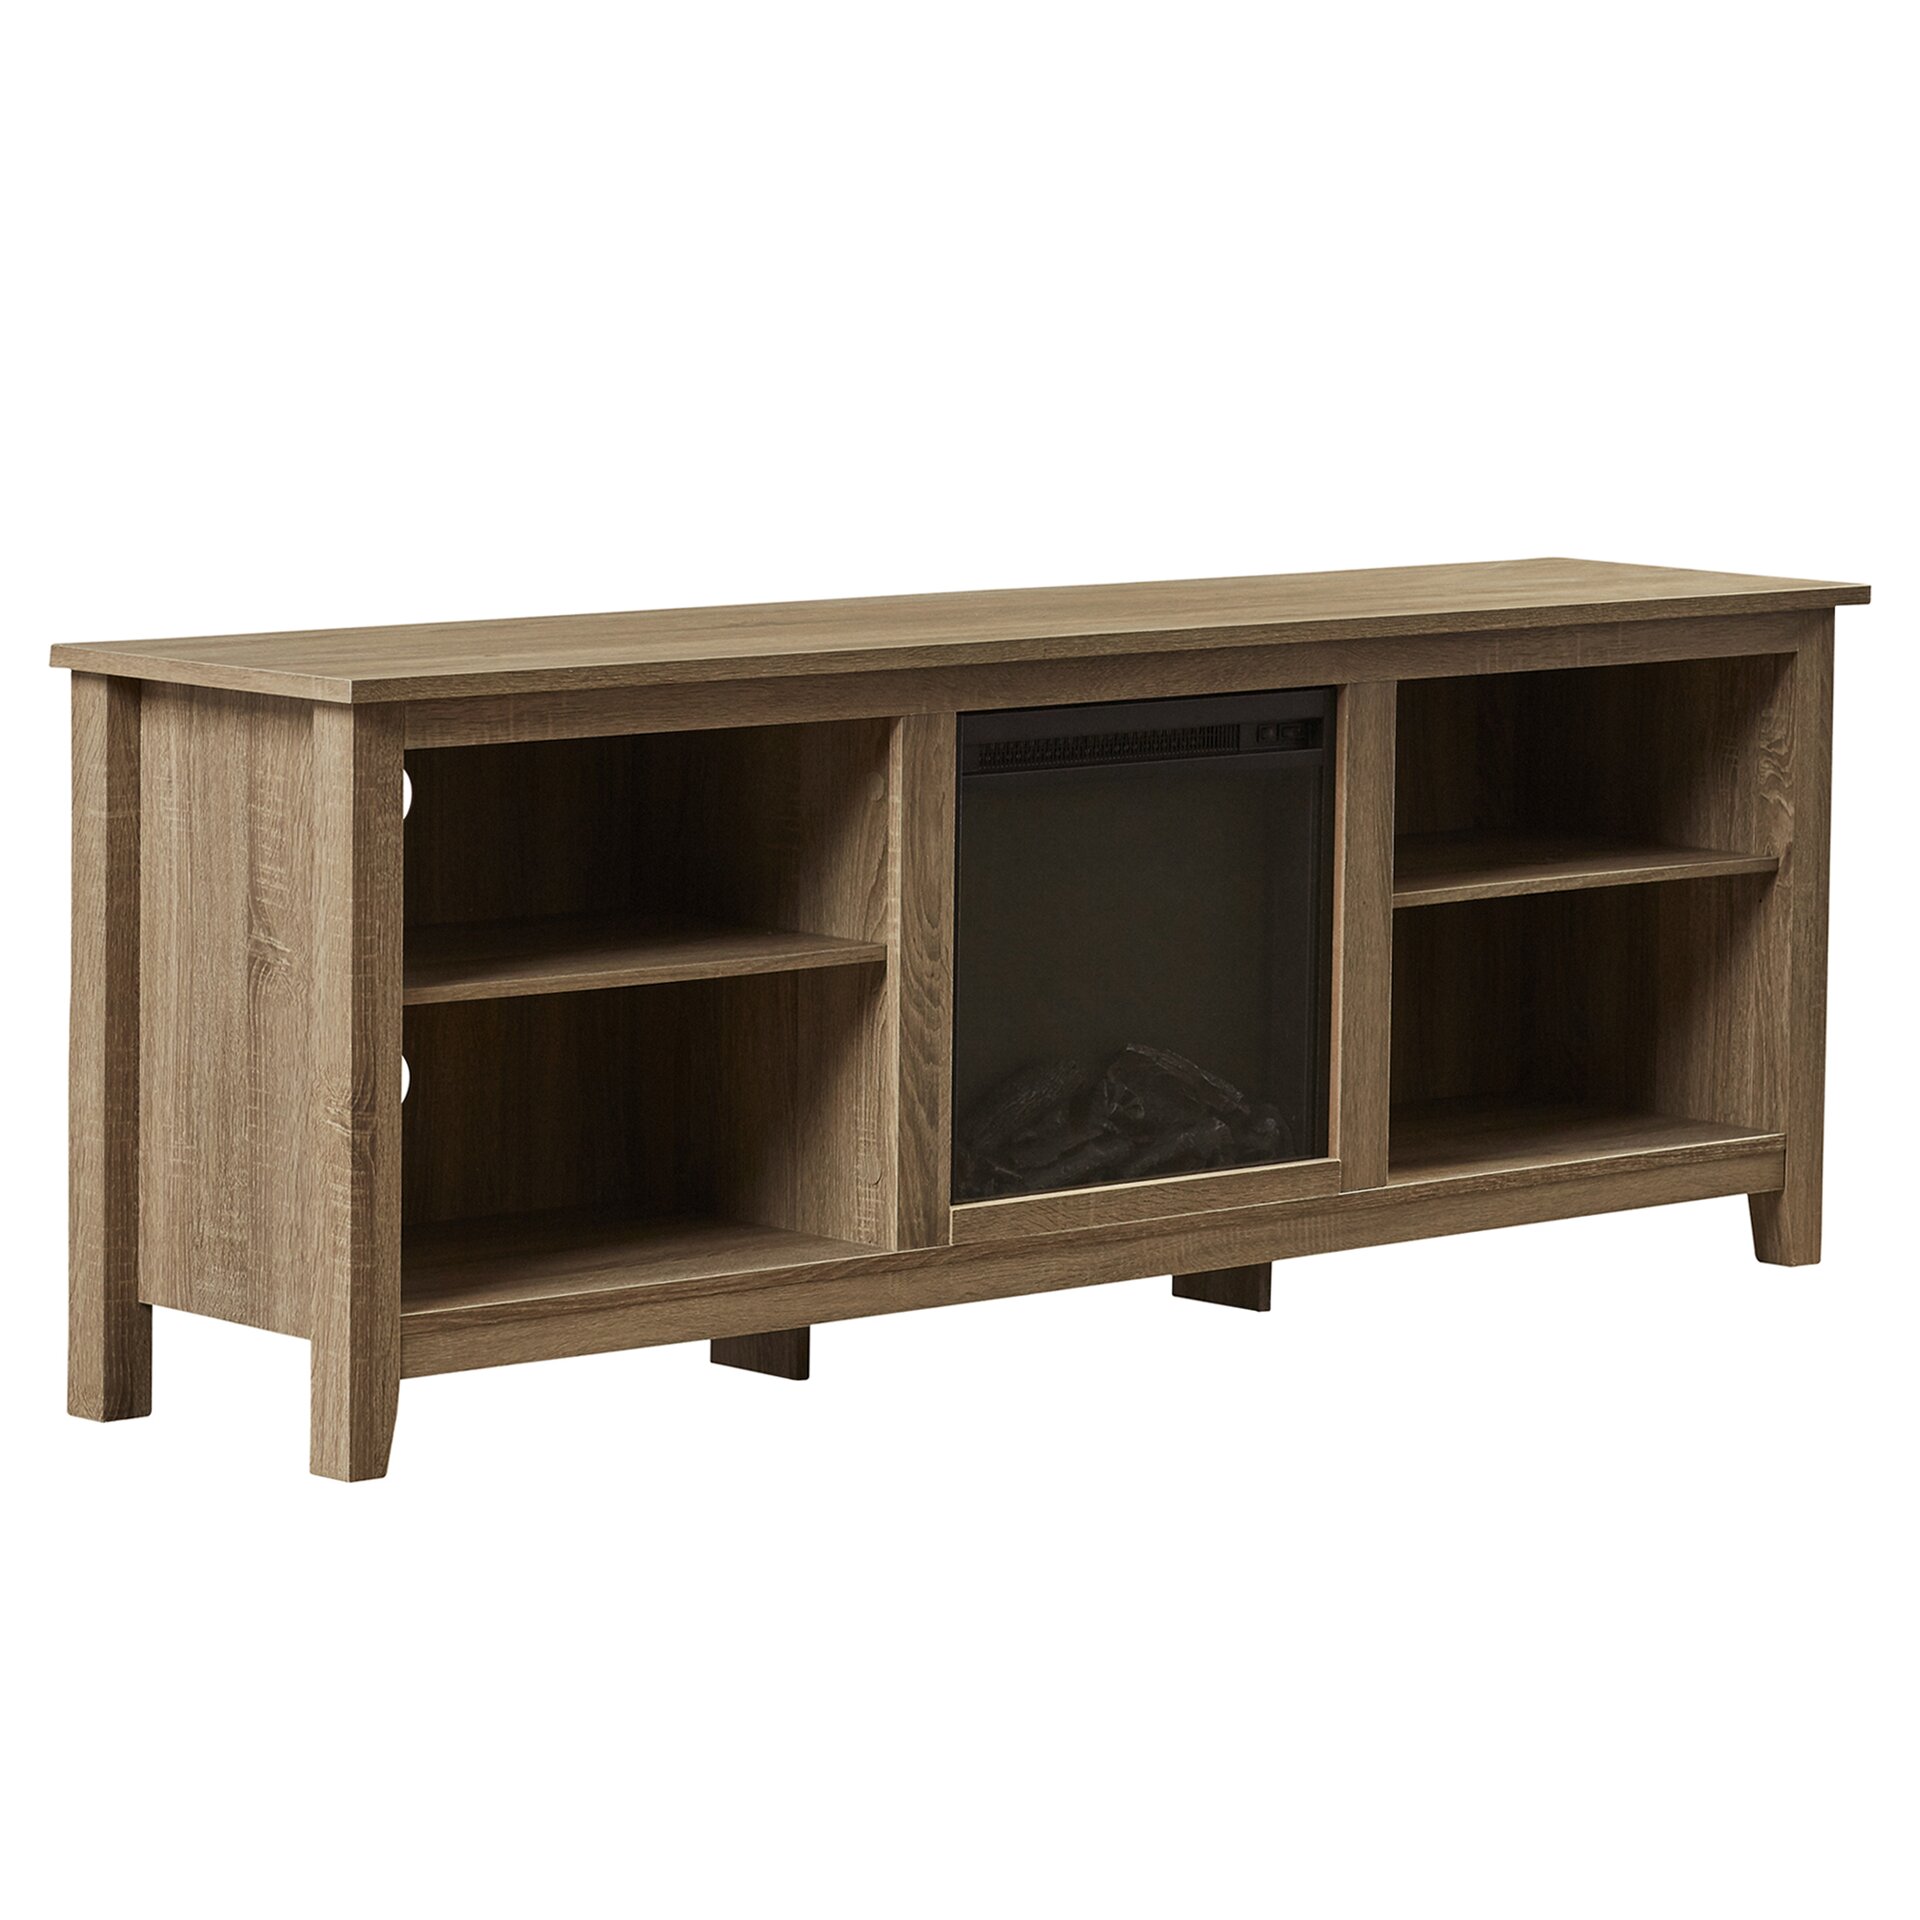 Beachcrest Home Sunbury TV Stand with Electric Fireplace ...